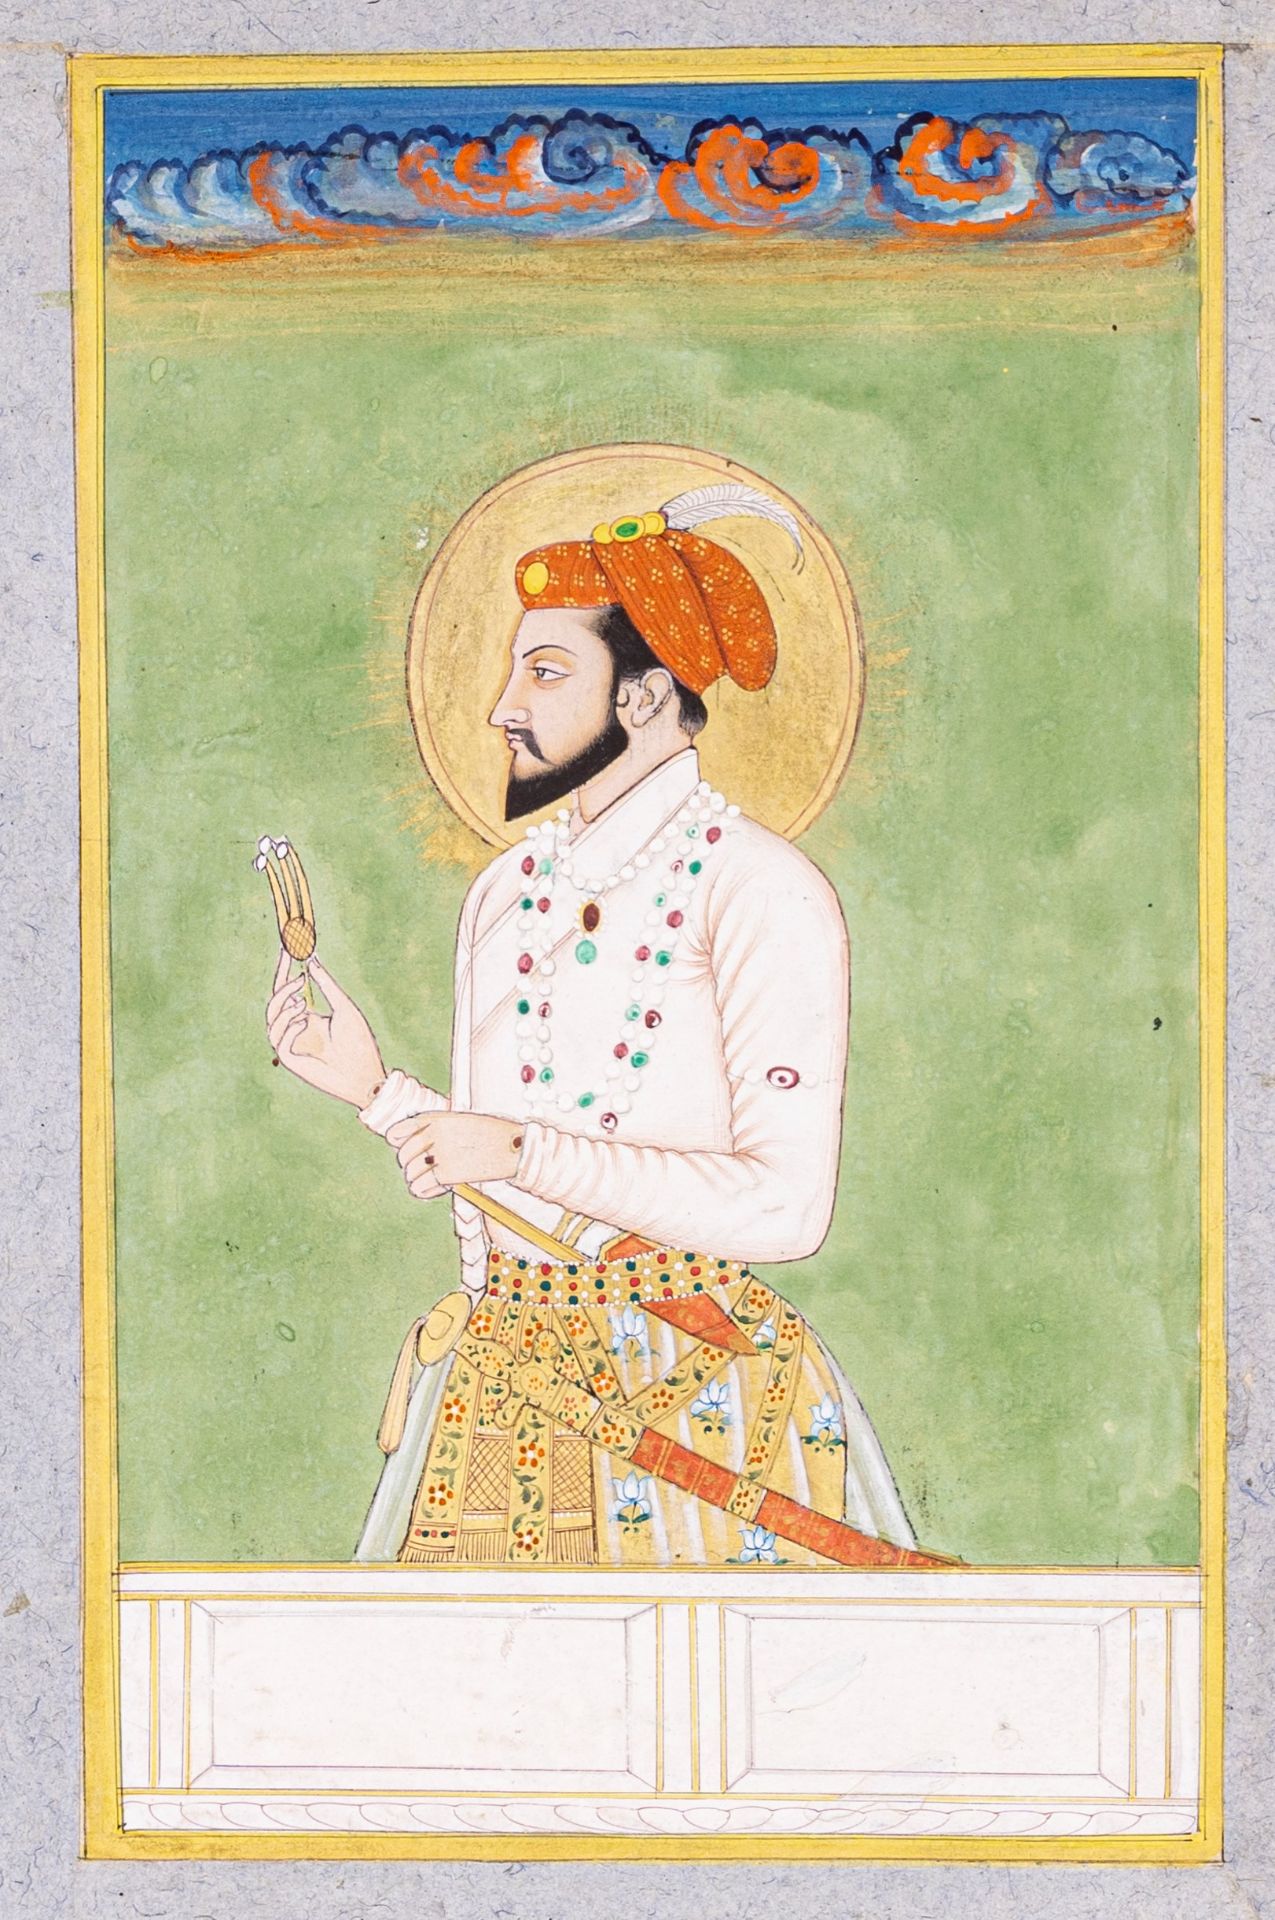 AN INDIAN MINIATURE PAINTING OF THE MUGHAL EMPEROR AURANGZEB, c. 1900s